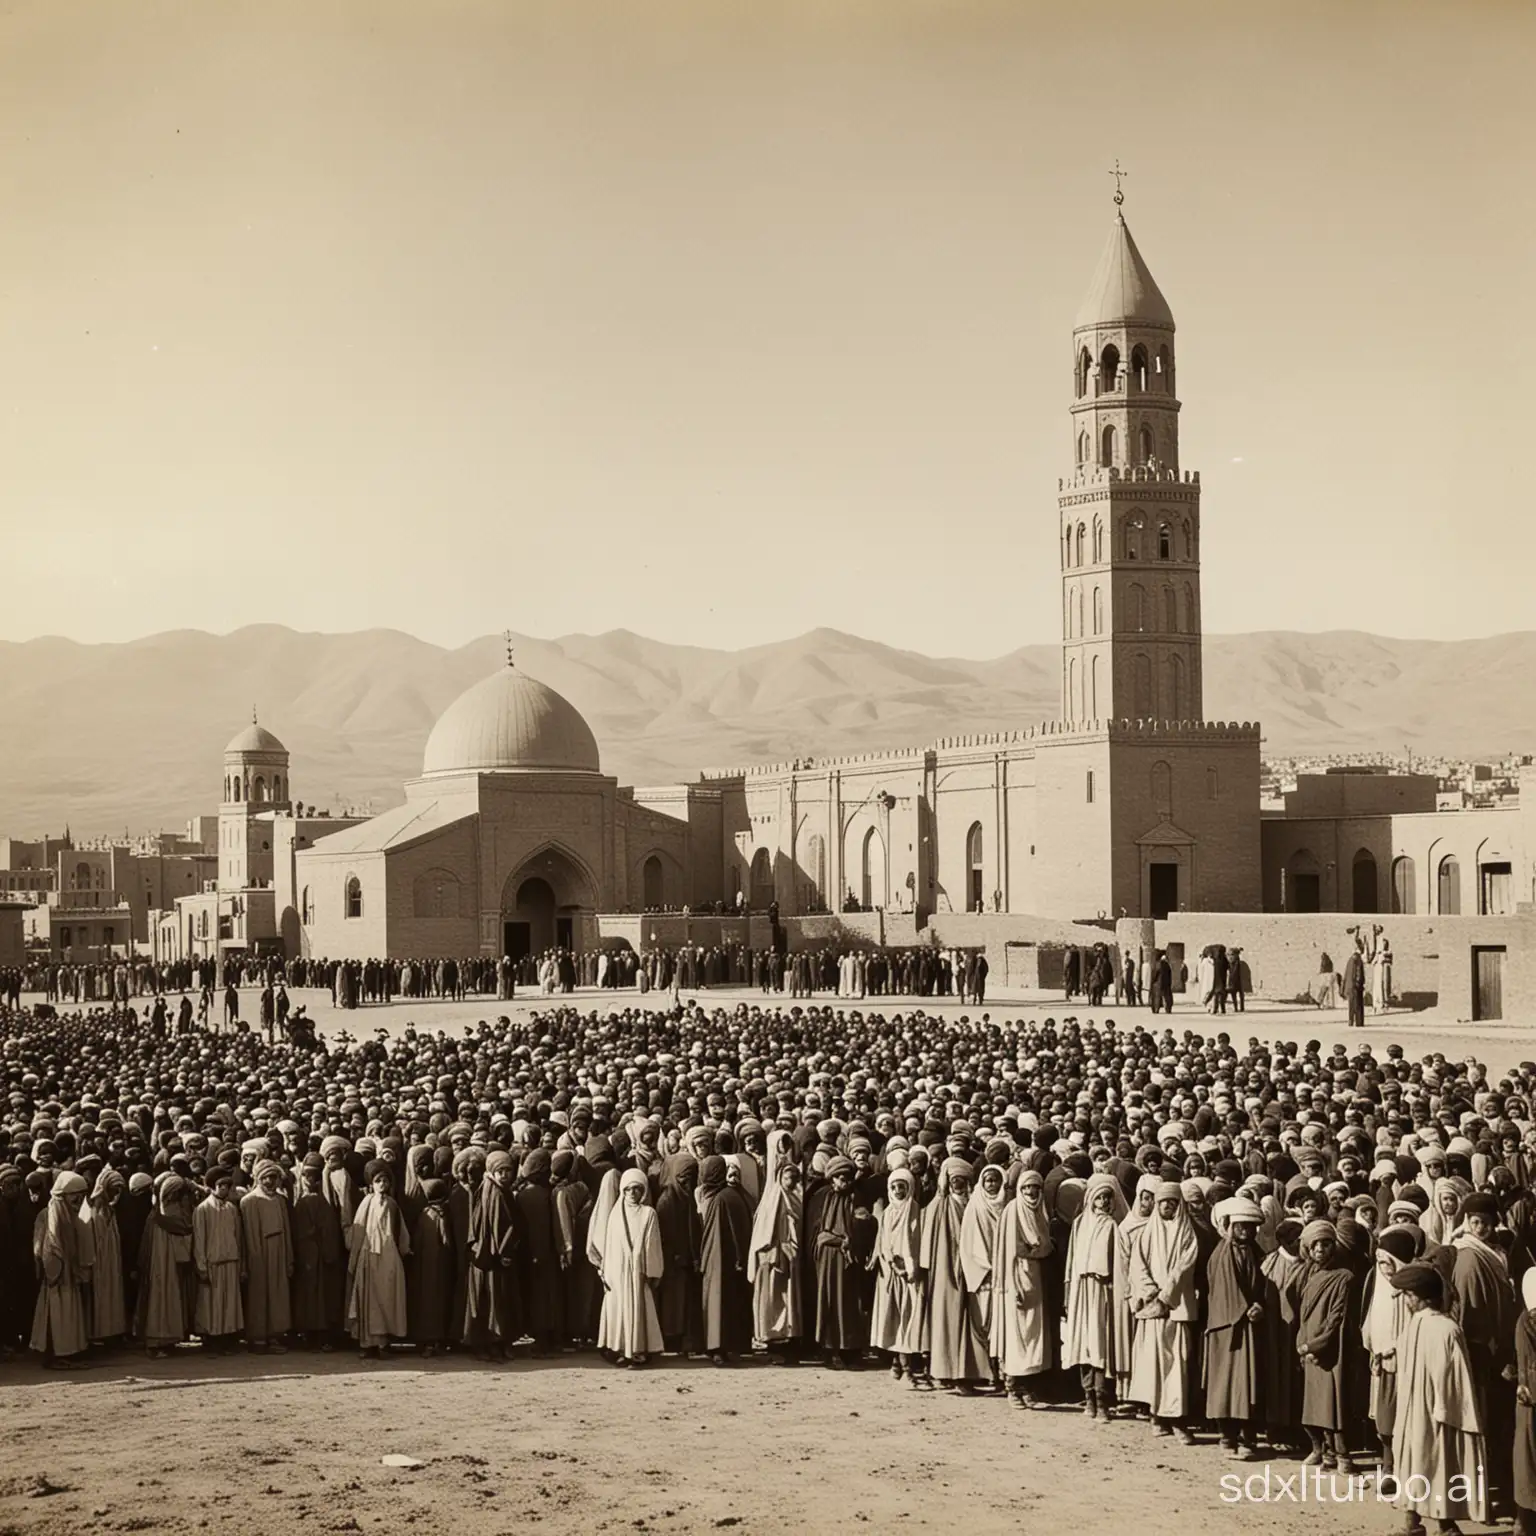 General view of the city of Tabriz in Iran, 1919, nine turbans and robes, church, school, students playing at school